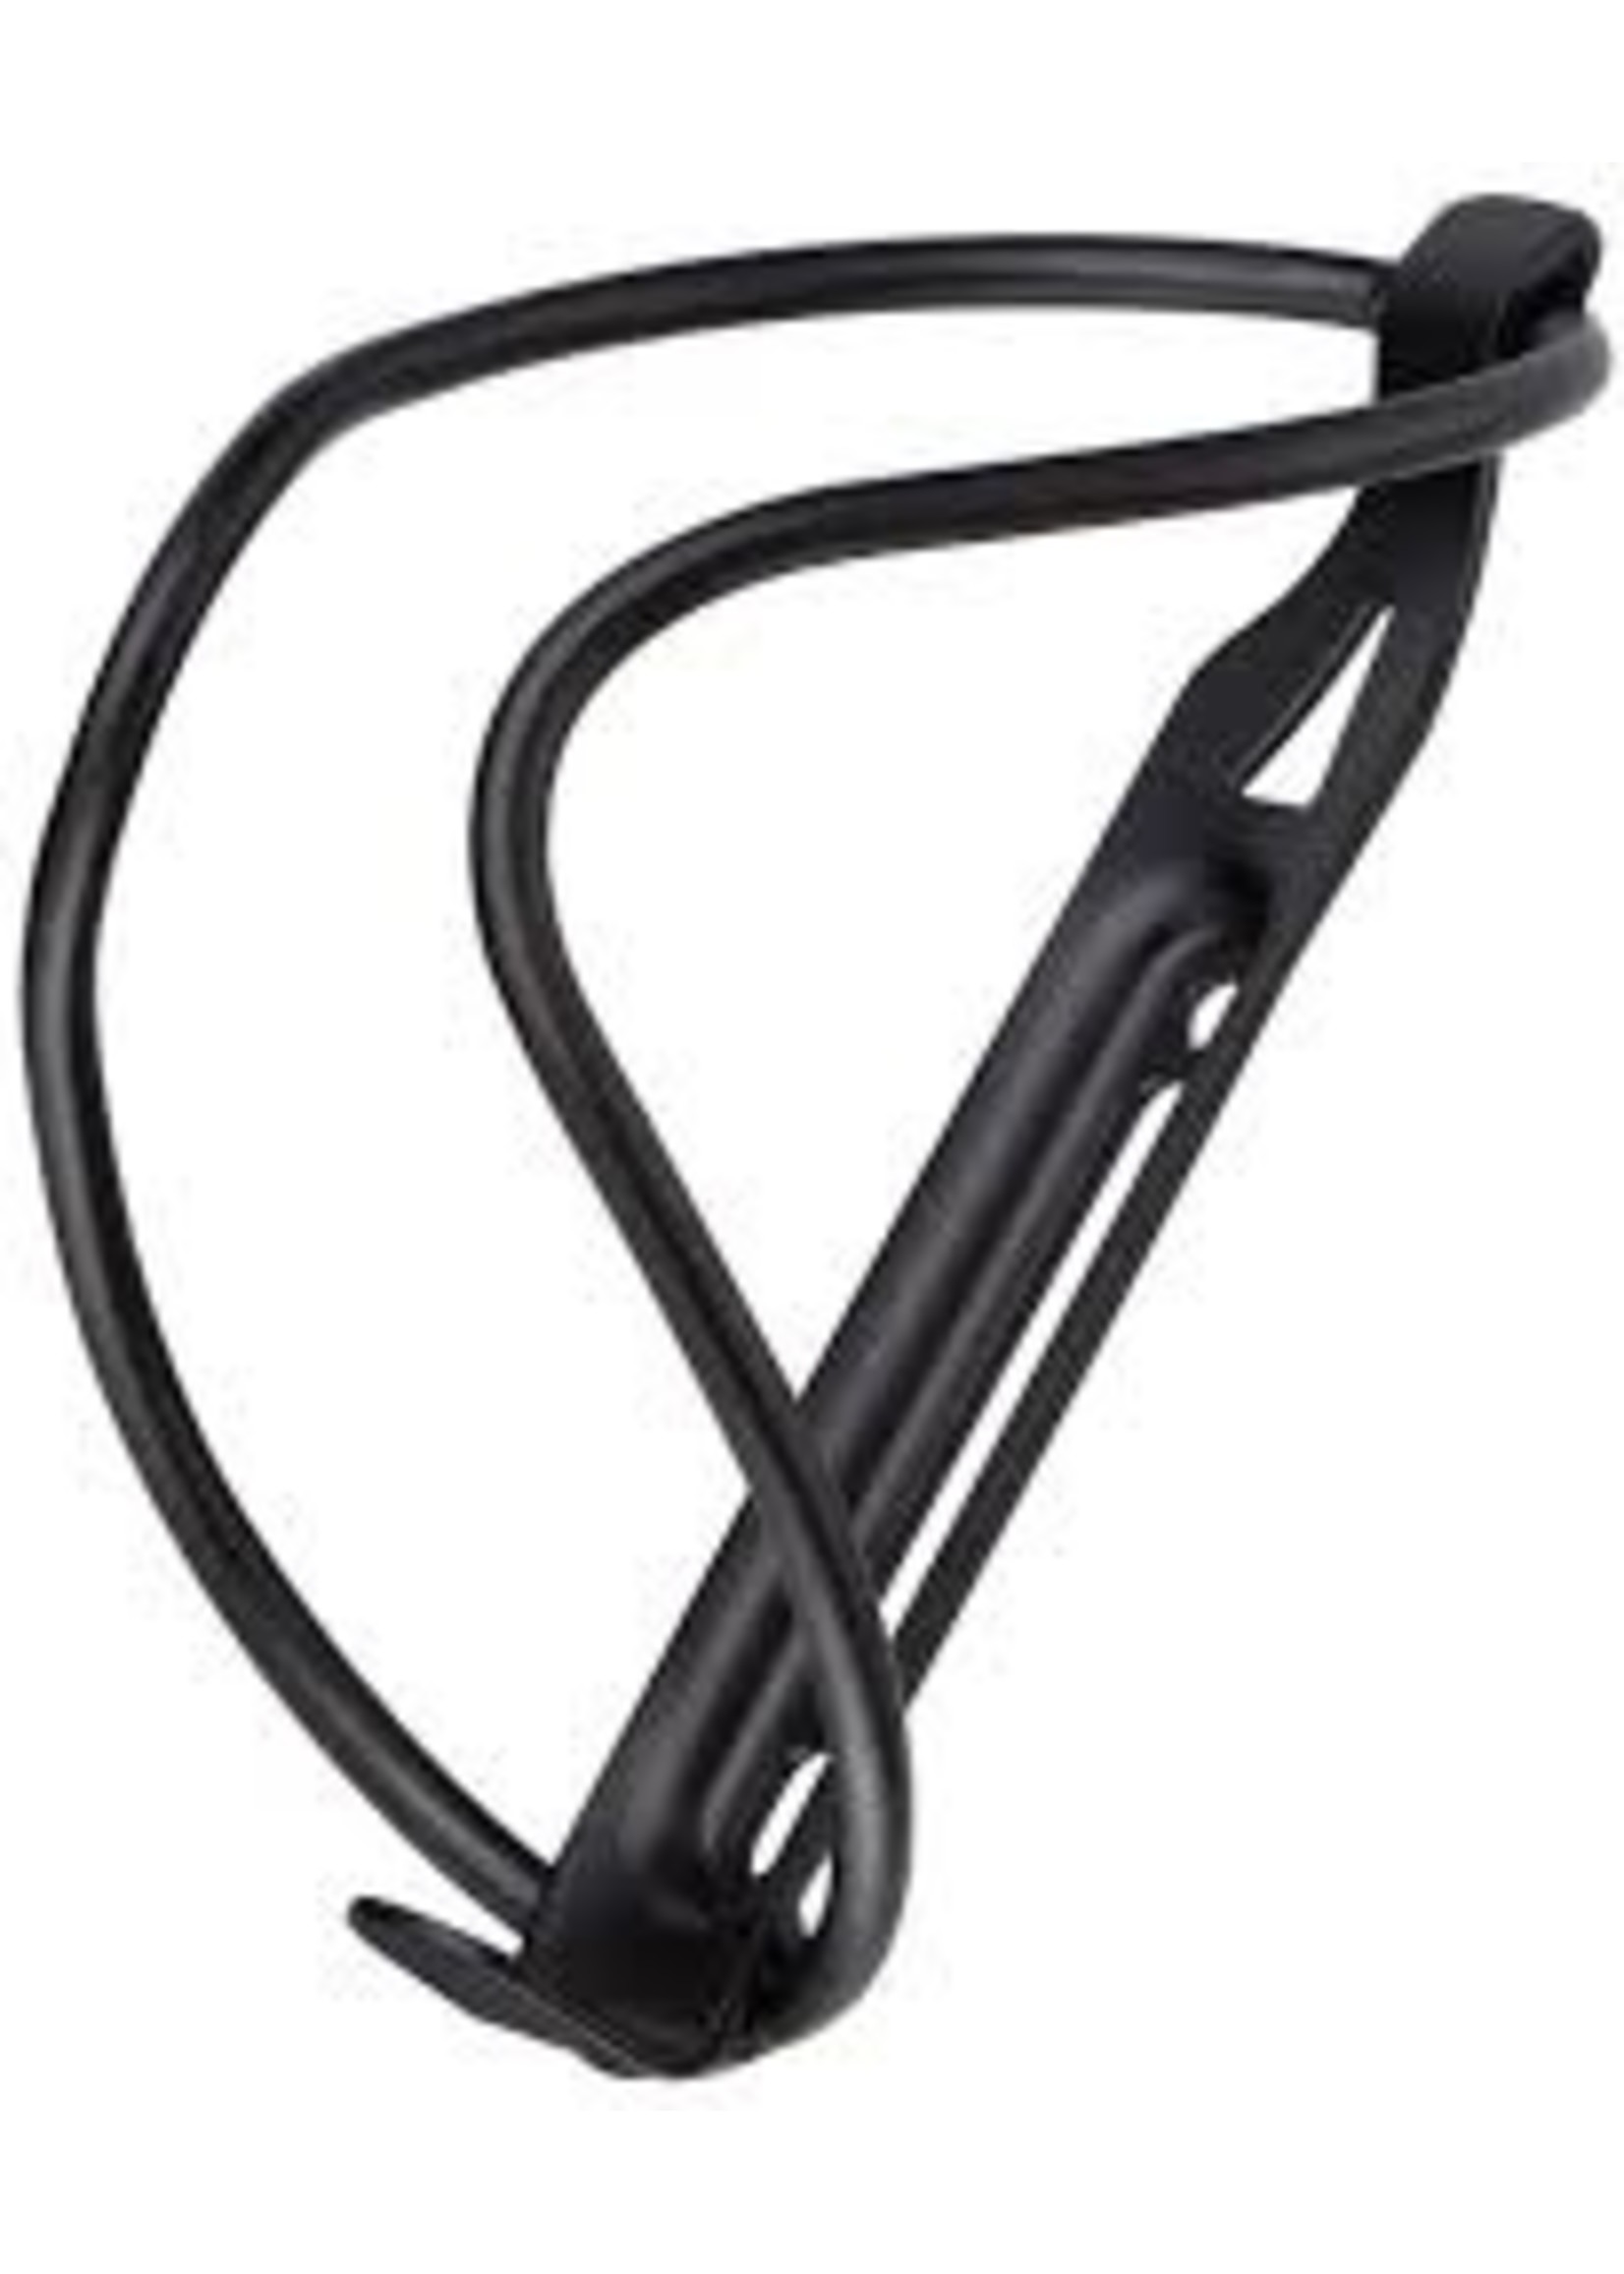 Cannondale GT-40 Cage One Size Black.